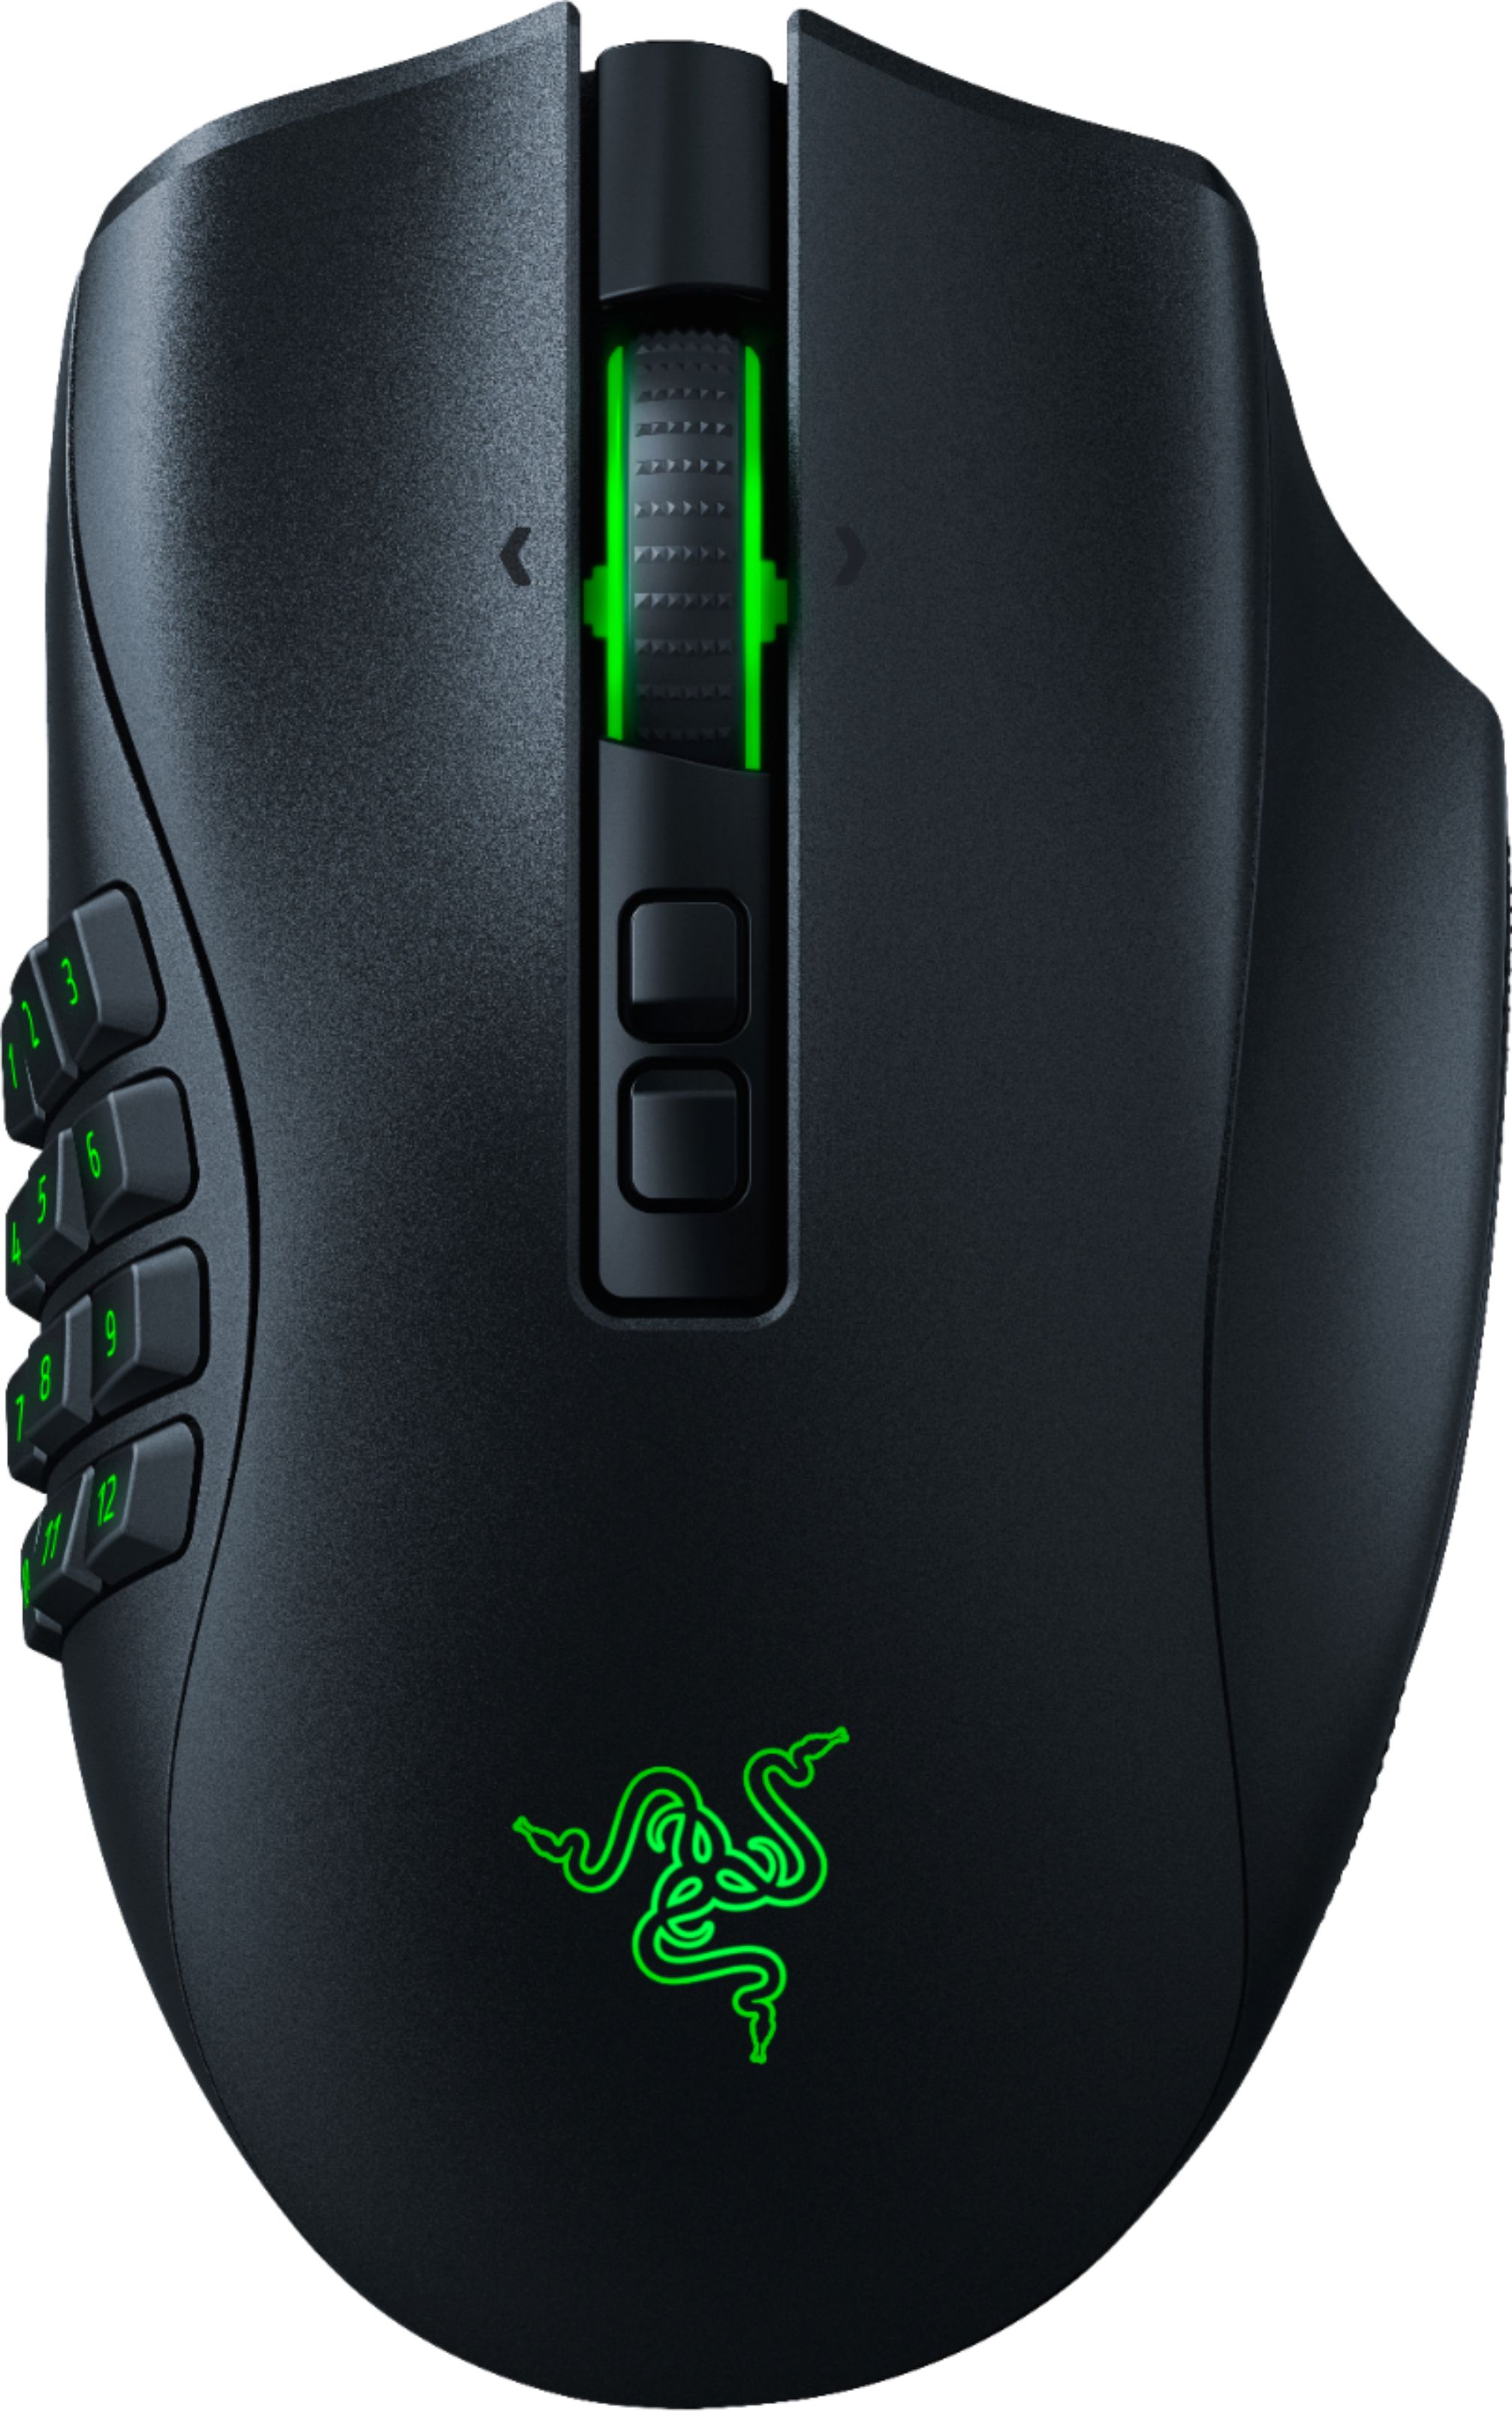 omvatten Fauteuil shampoo Razer Naga Pro Wireless Optical with Interchangeable Side Plates in 2, 6,  12 Button Configurations Gaming Mouse Black RZ01-03420100-R3U1 - Best Buy